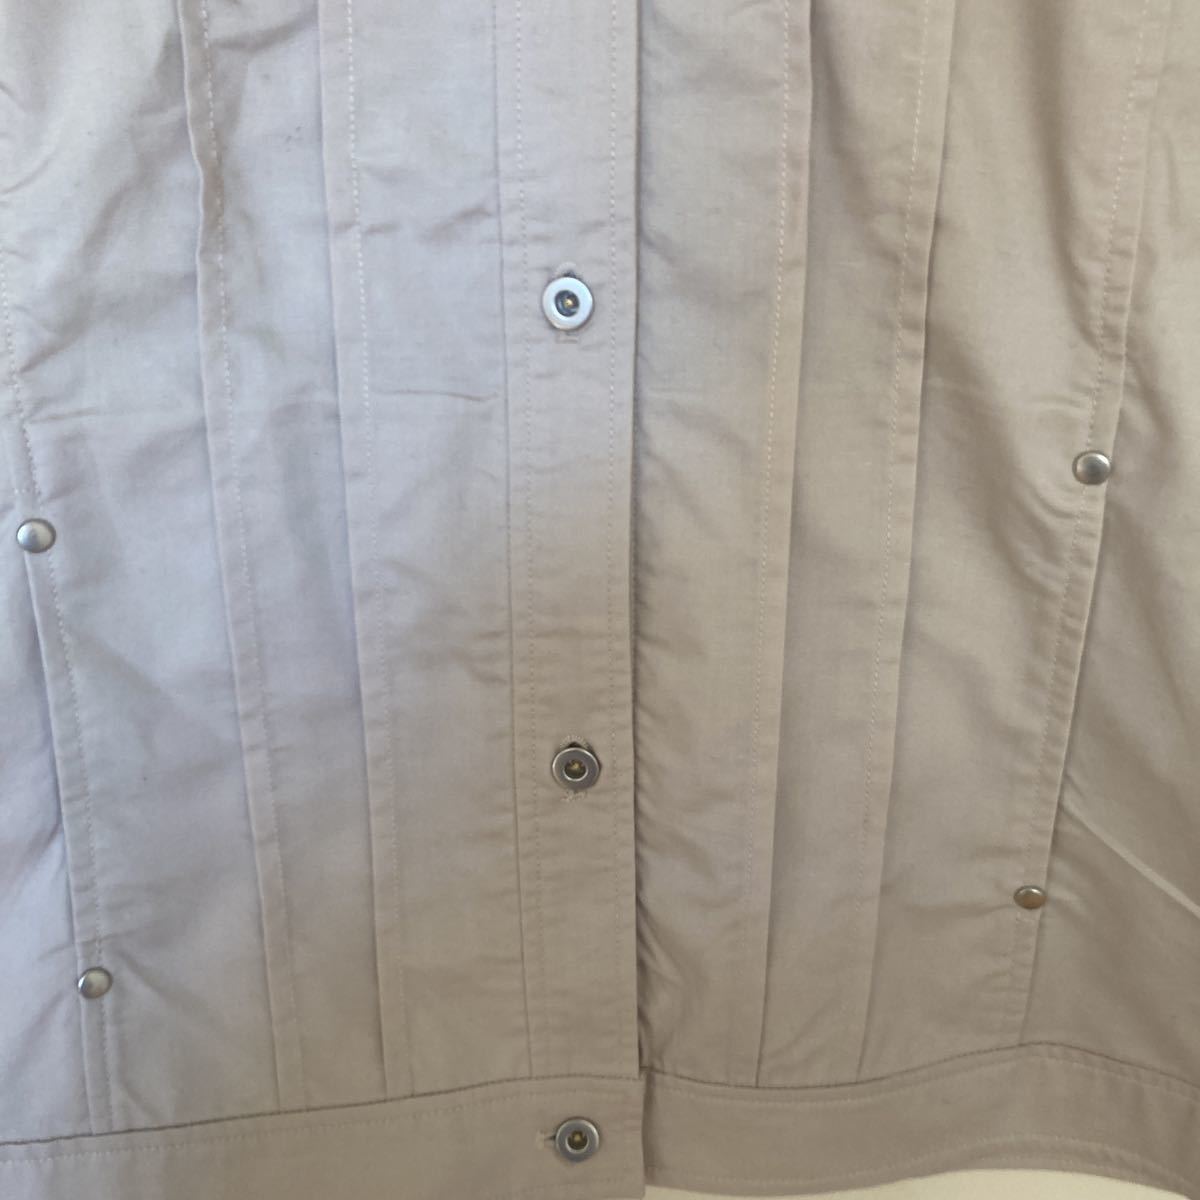 JACKET lady's jacket beige Golden Bear flax .LL size side pocket attaching circle collar . what . also join ... one sheets also piling .. new goods tag 